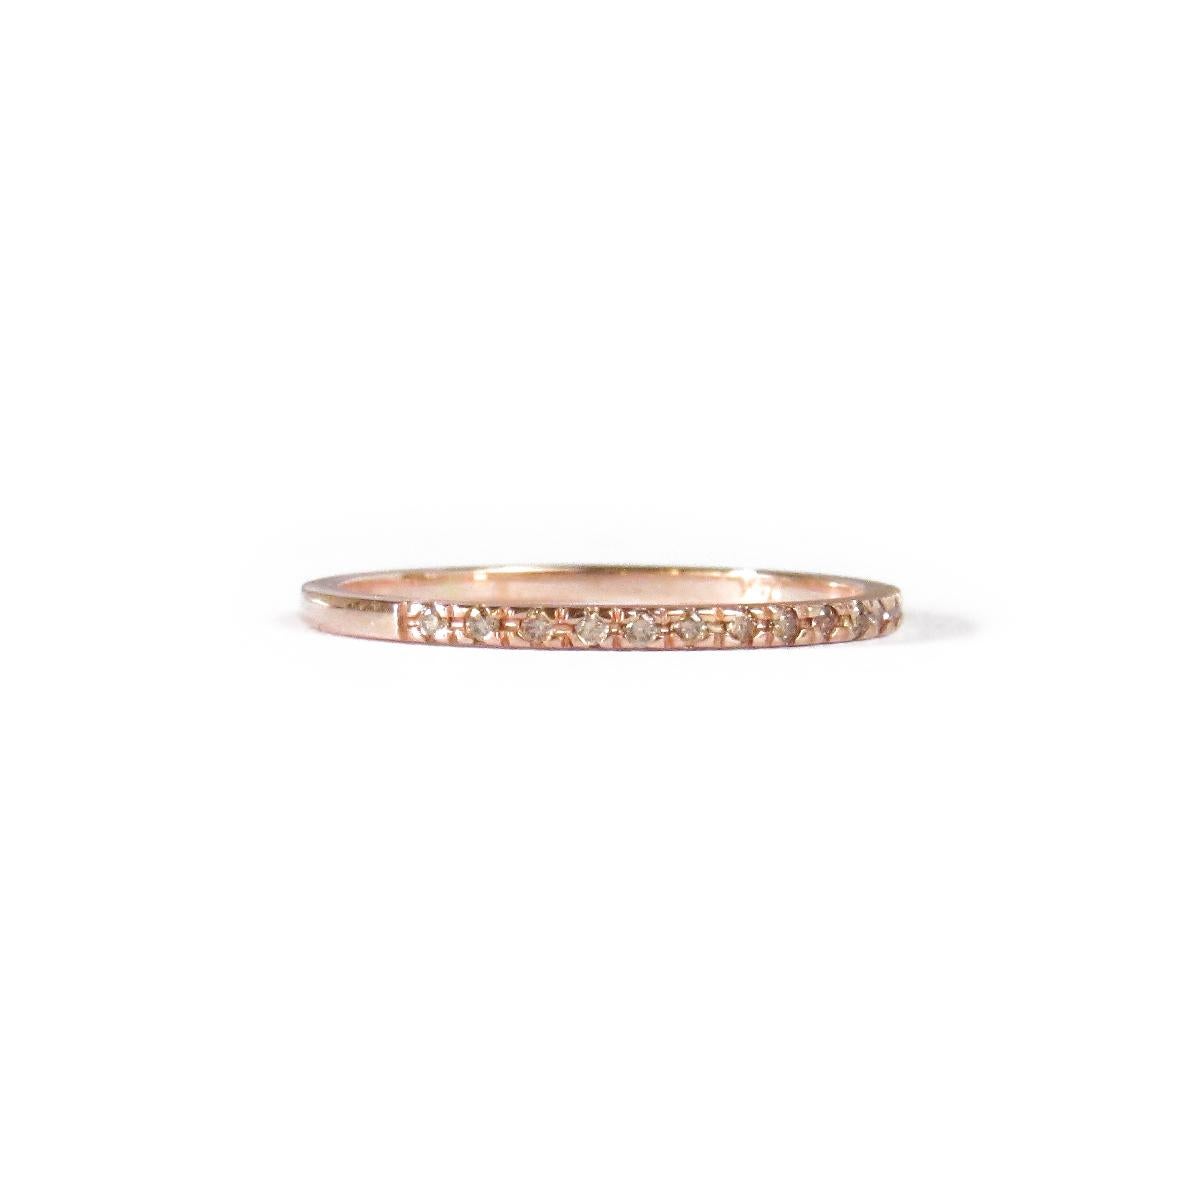 MADE TO ORDER *Please note that we take 30 business days to create your jewel before its ready to ship. 

A 14K rose gold unique anniversary band that contains champagne diamonds. 

Gemstone: 
Diamonds
Total Carat Weight: 0.09 ct
Color: